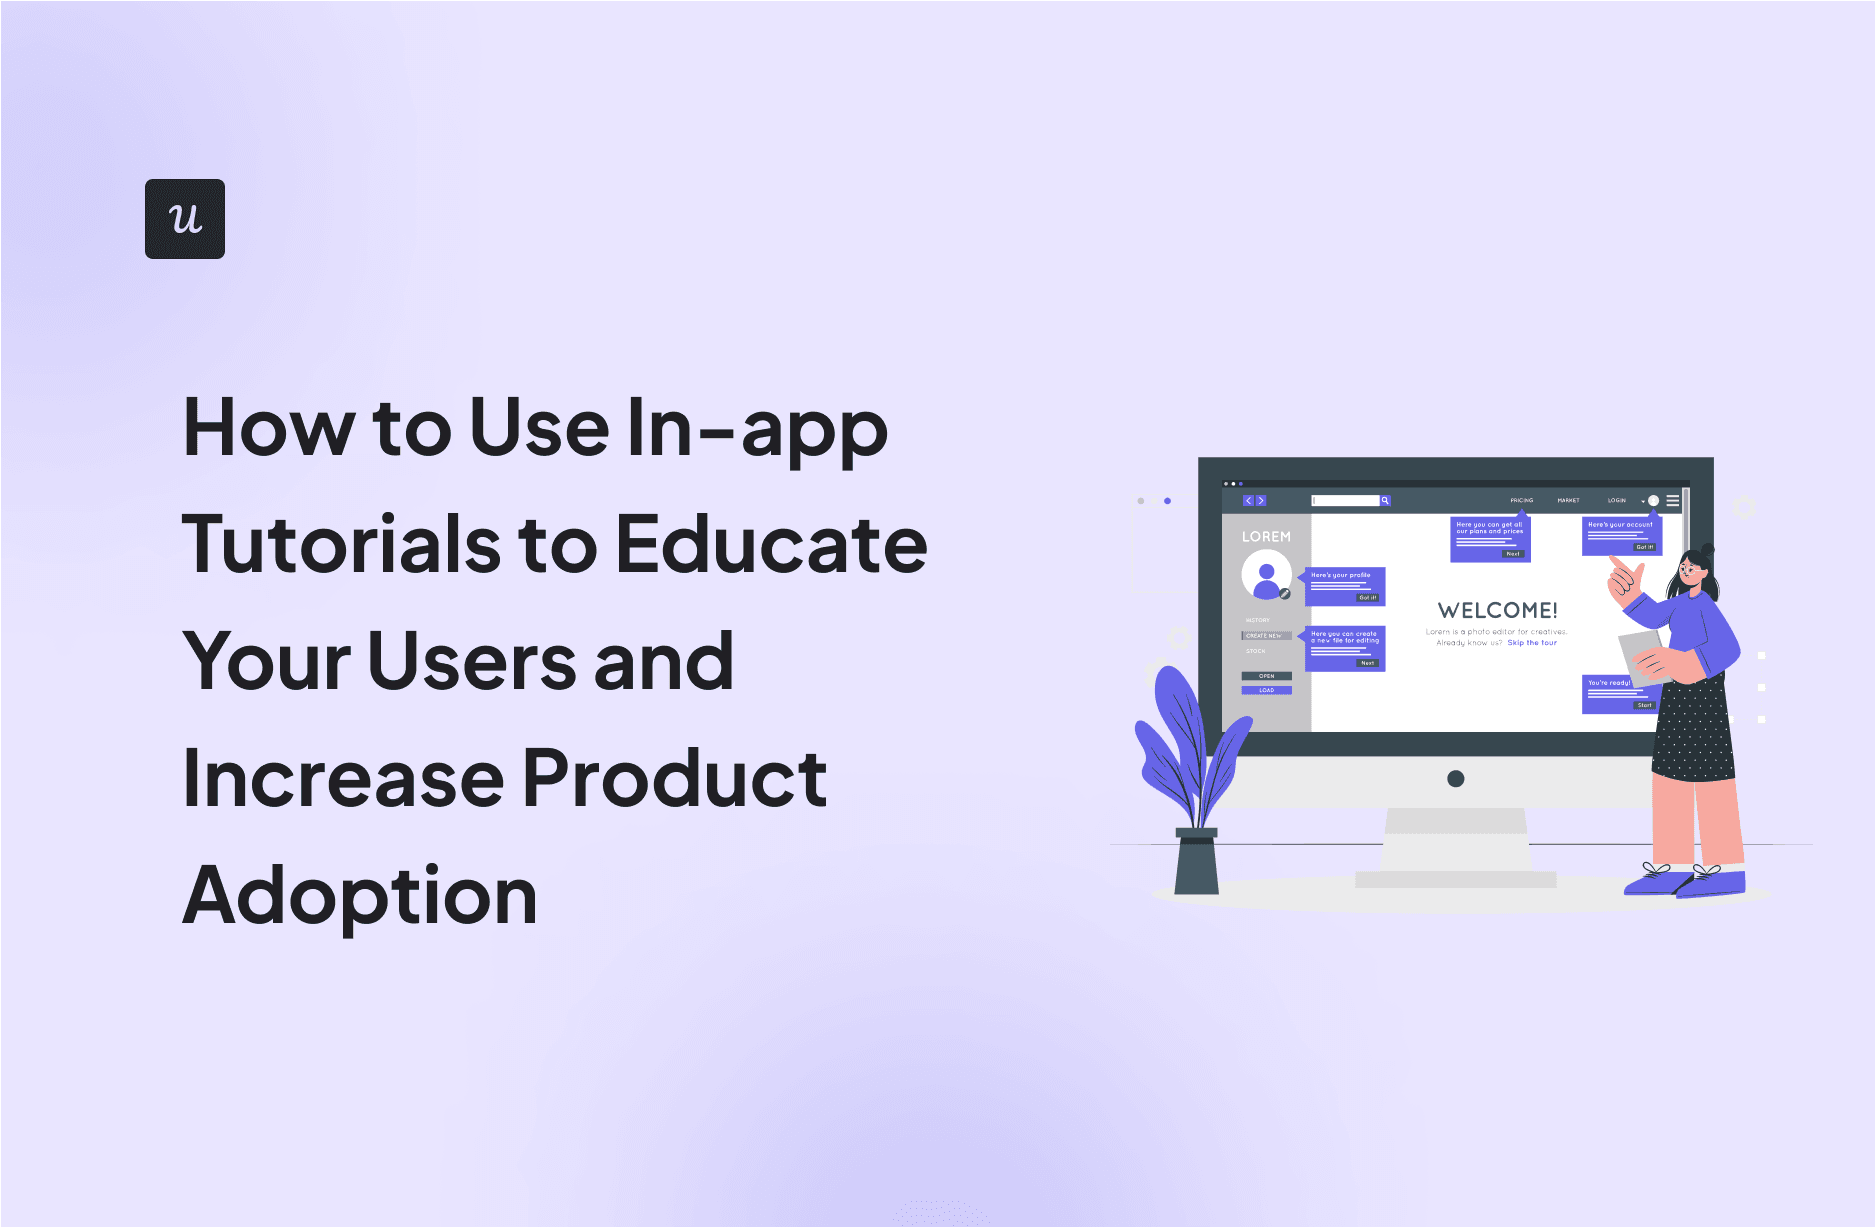 How to Use In-app Tutorials to Educate Your Users and Increase Product Adoption cover